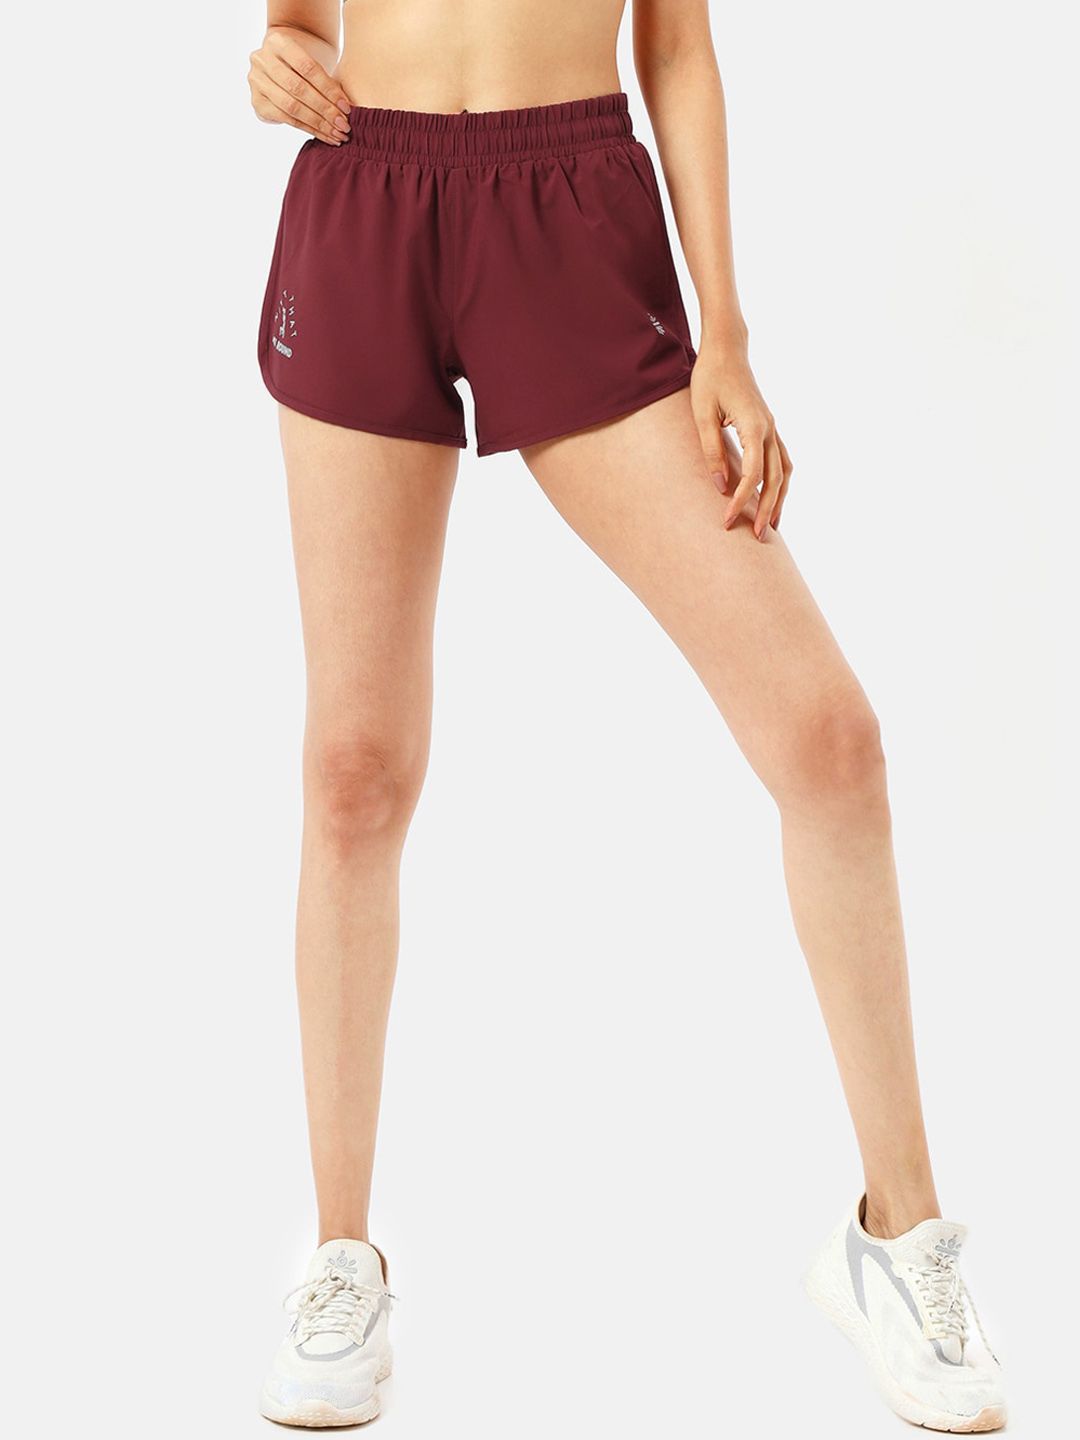 Cultsport Women Maroon Mid-Rise Training or Gym Sports Shorts Price in India